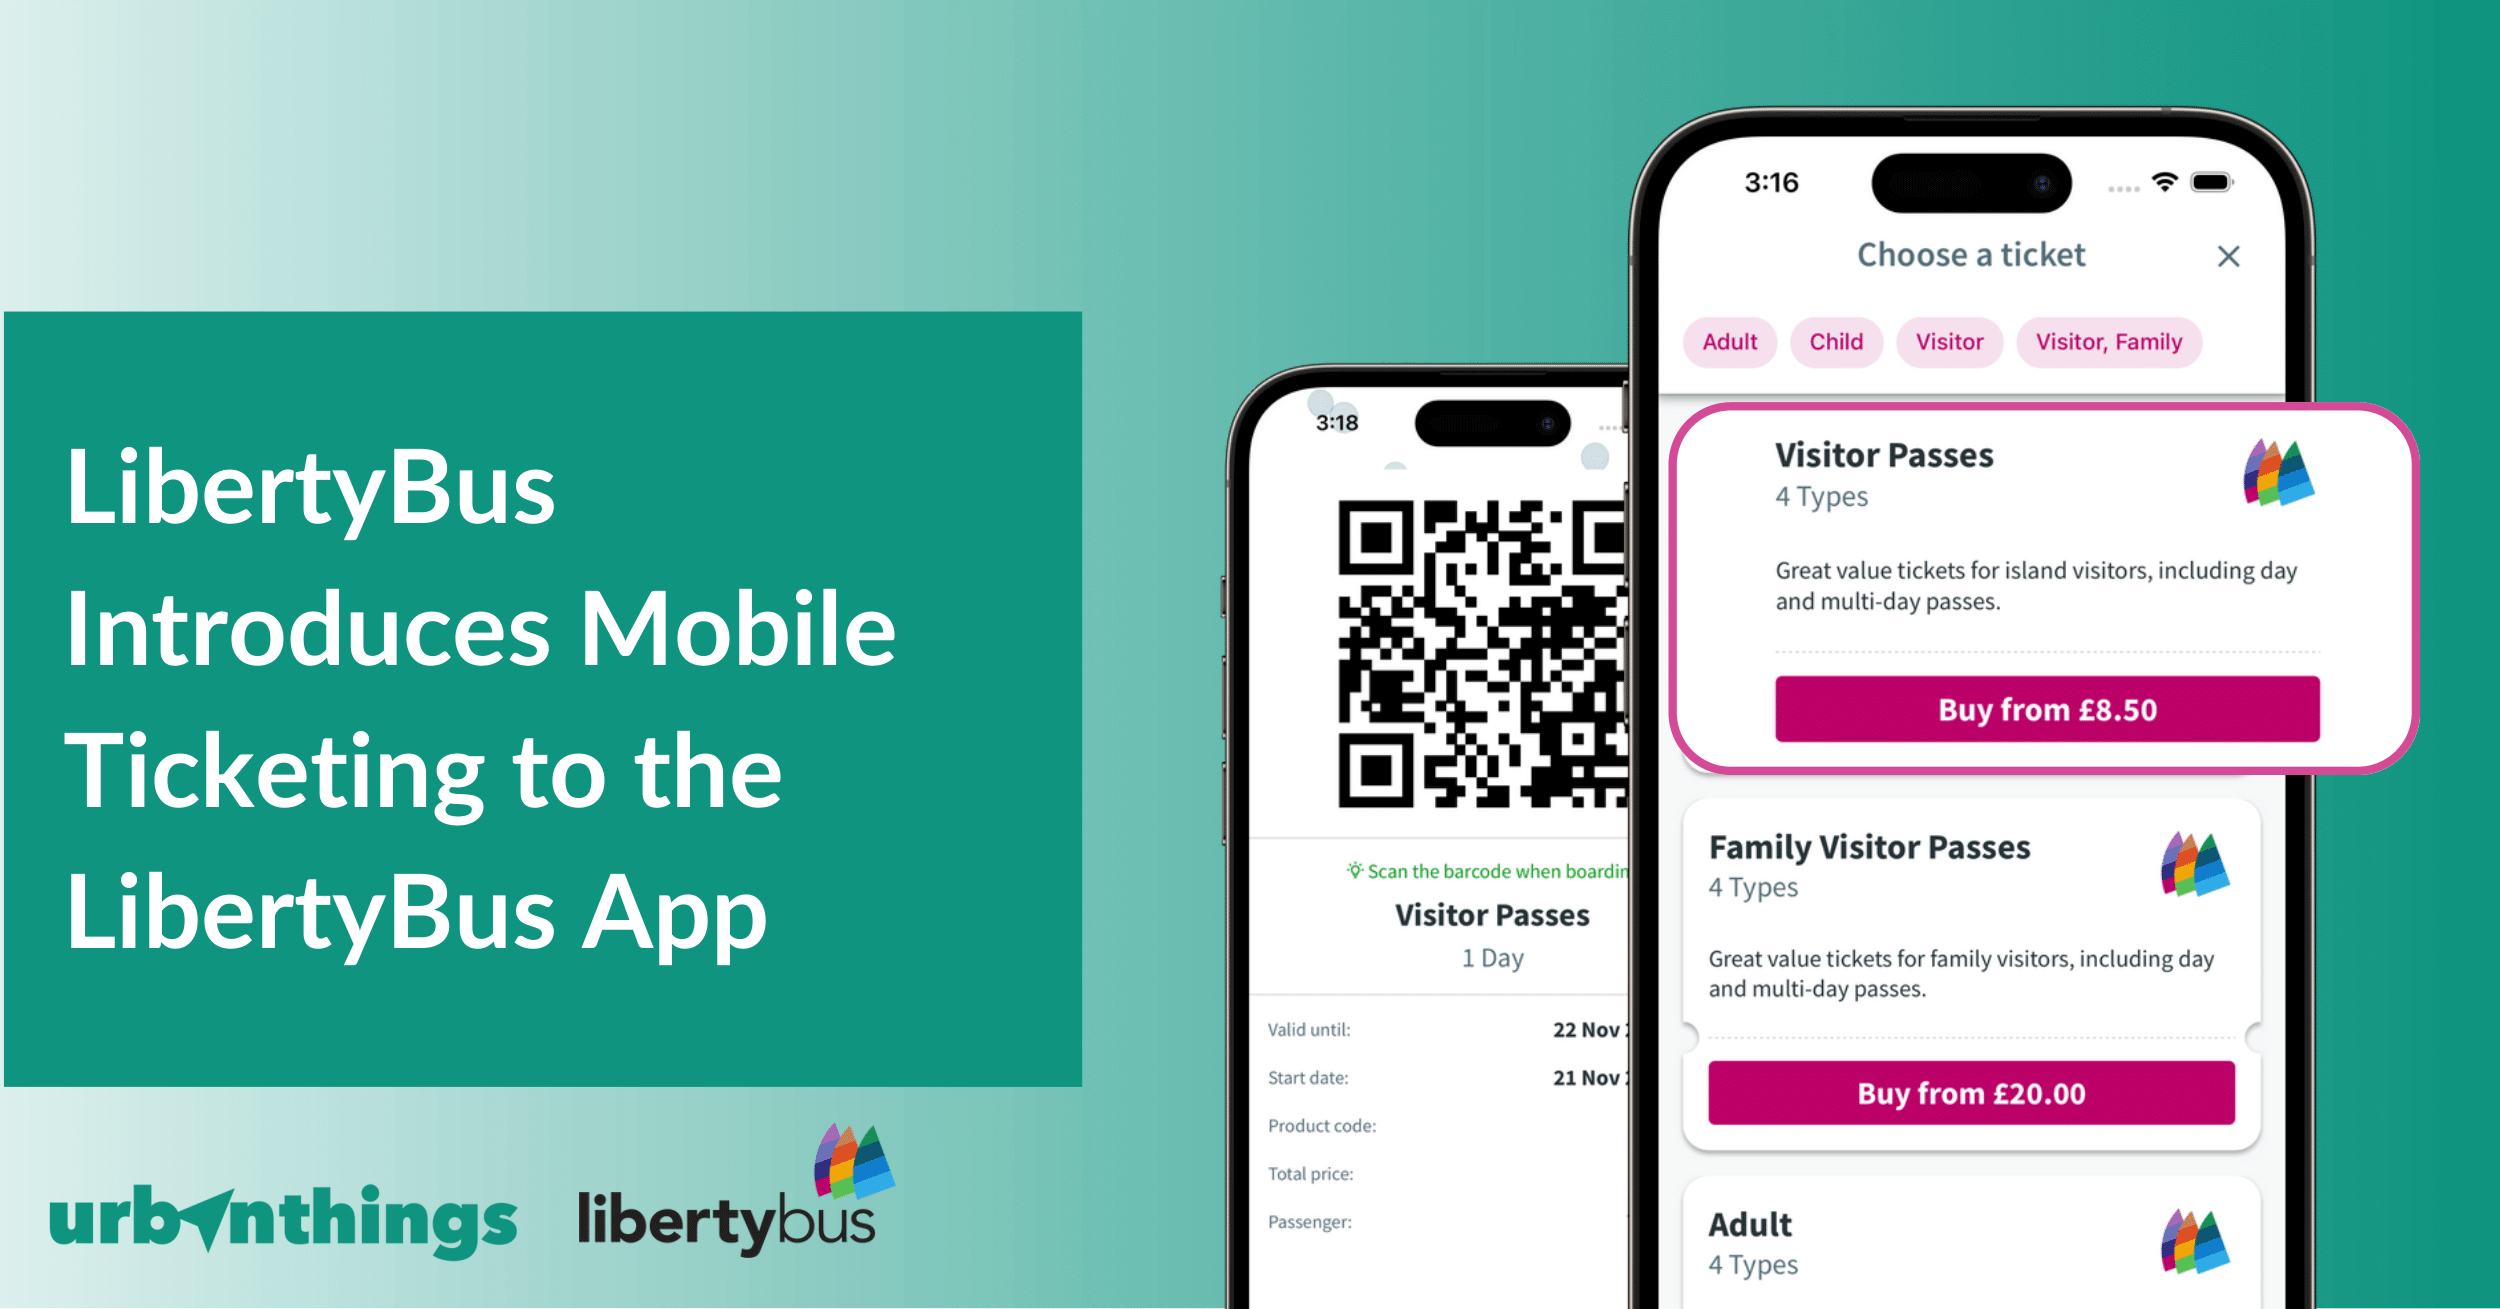 LibertyBus introduces smart ticketing to the LibertyBus app